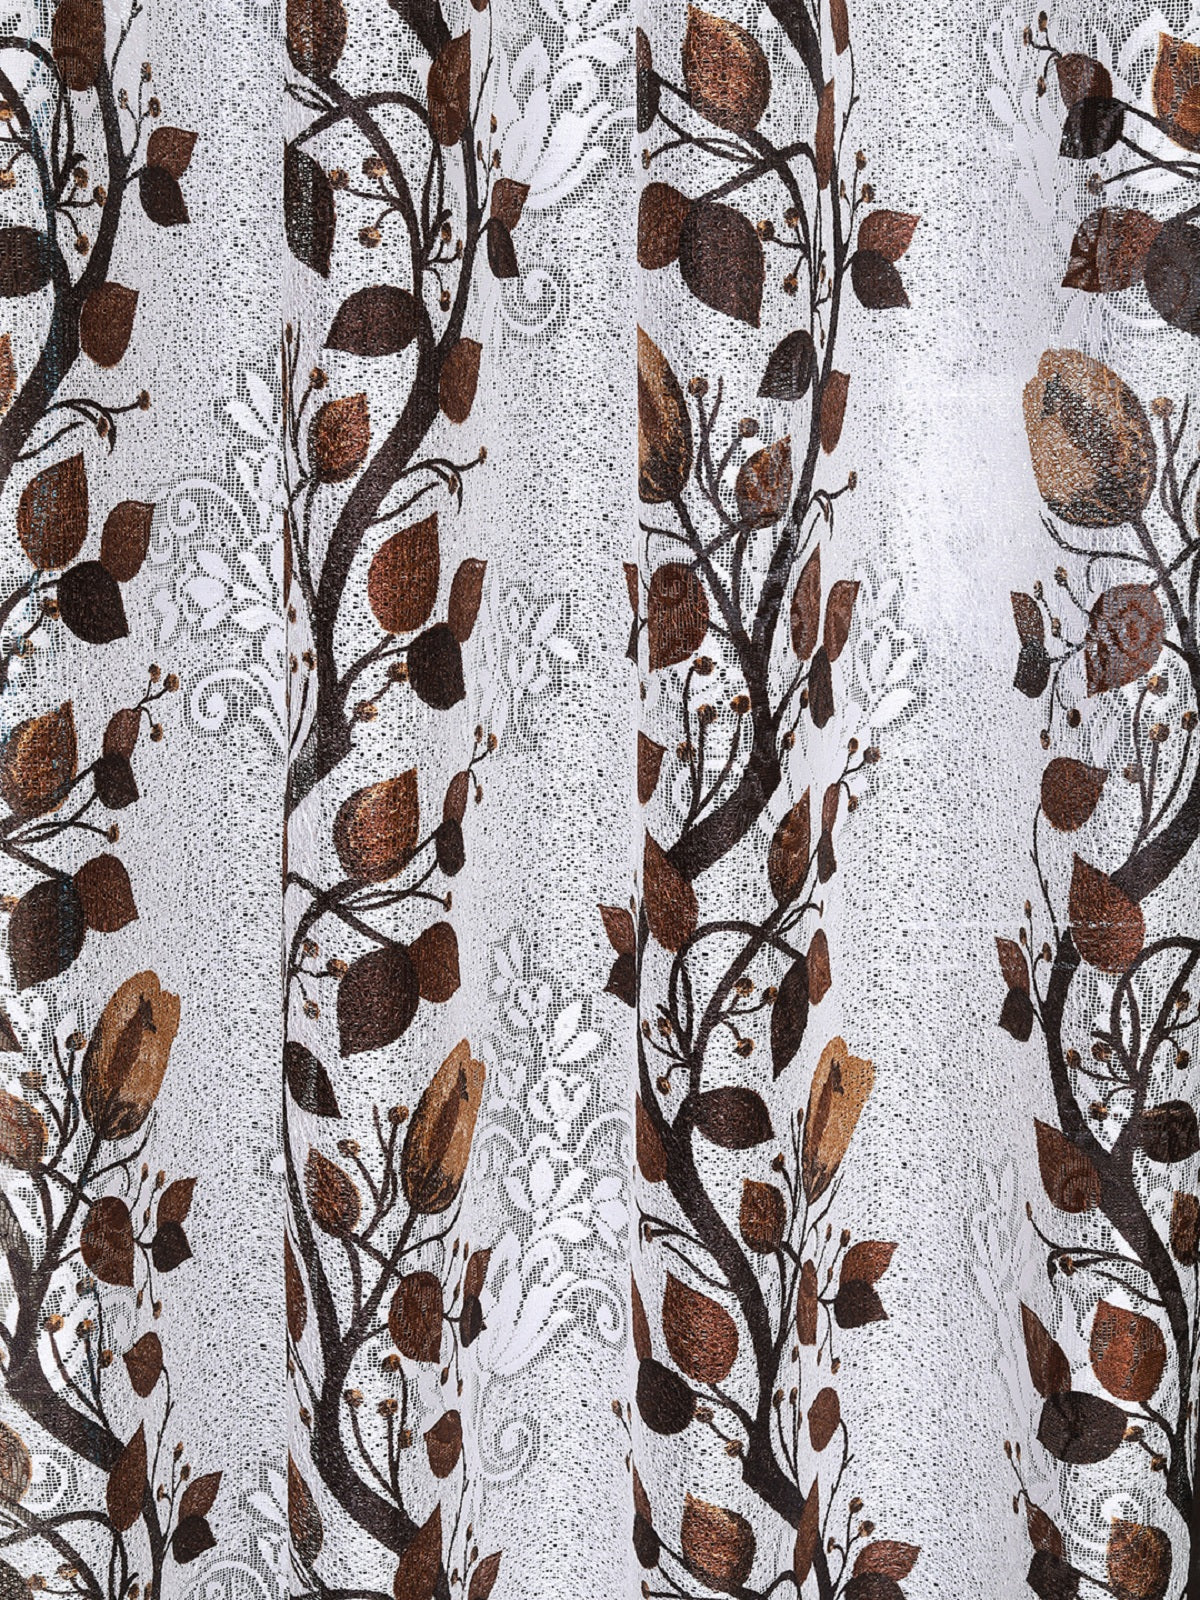 Romee Brown & Off White Floral Patterned Set of 2 Long Door Curtains